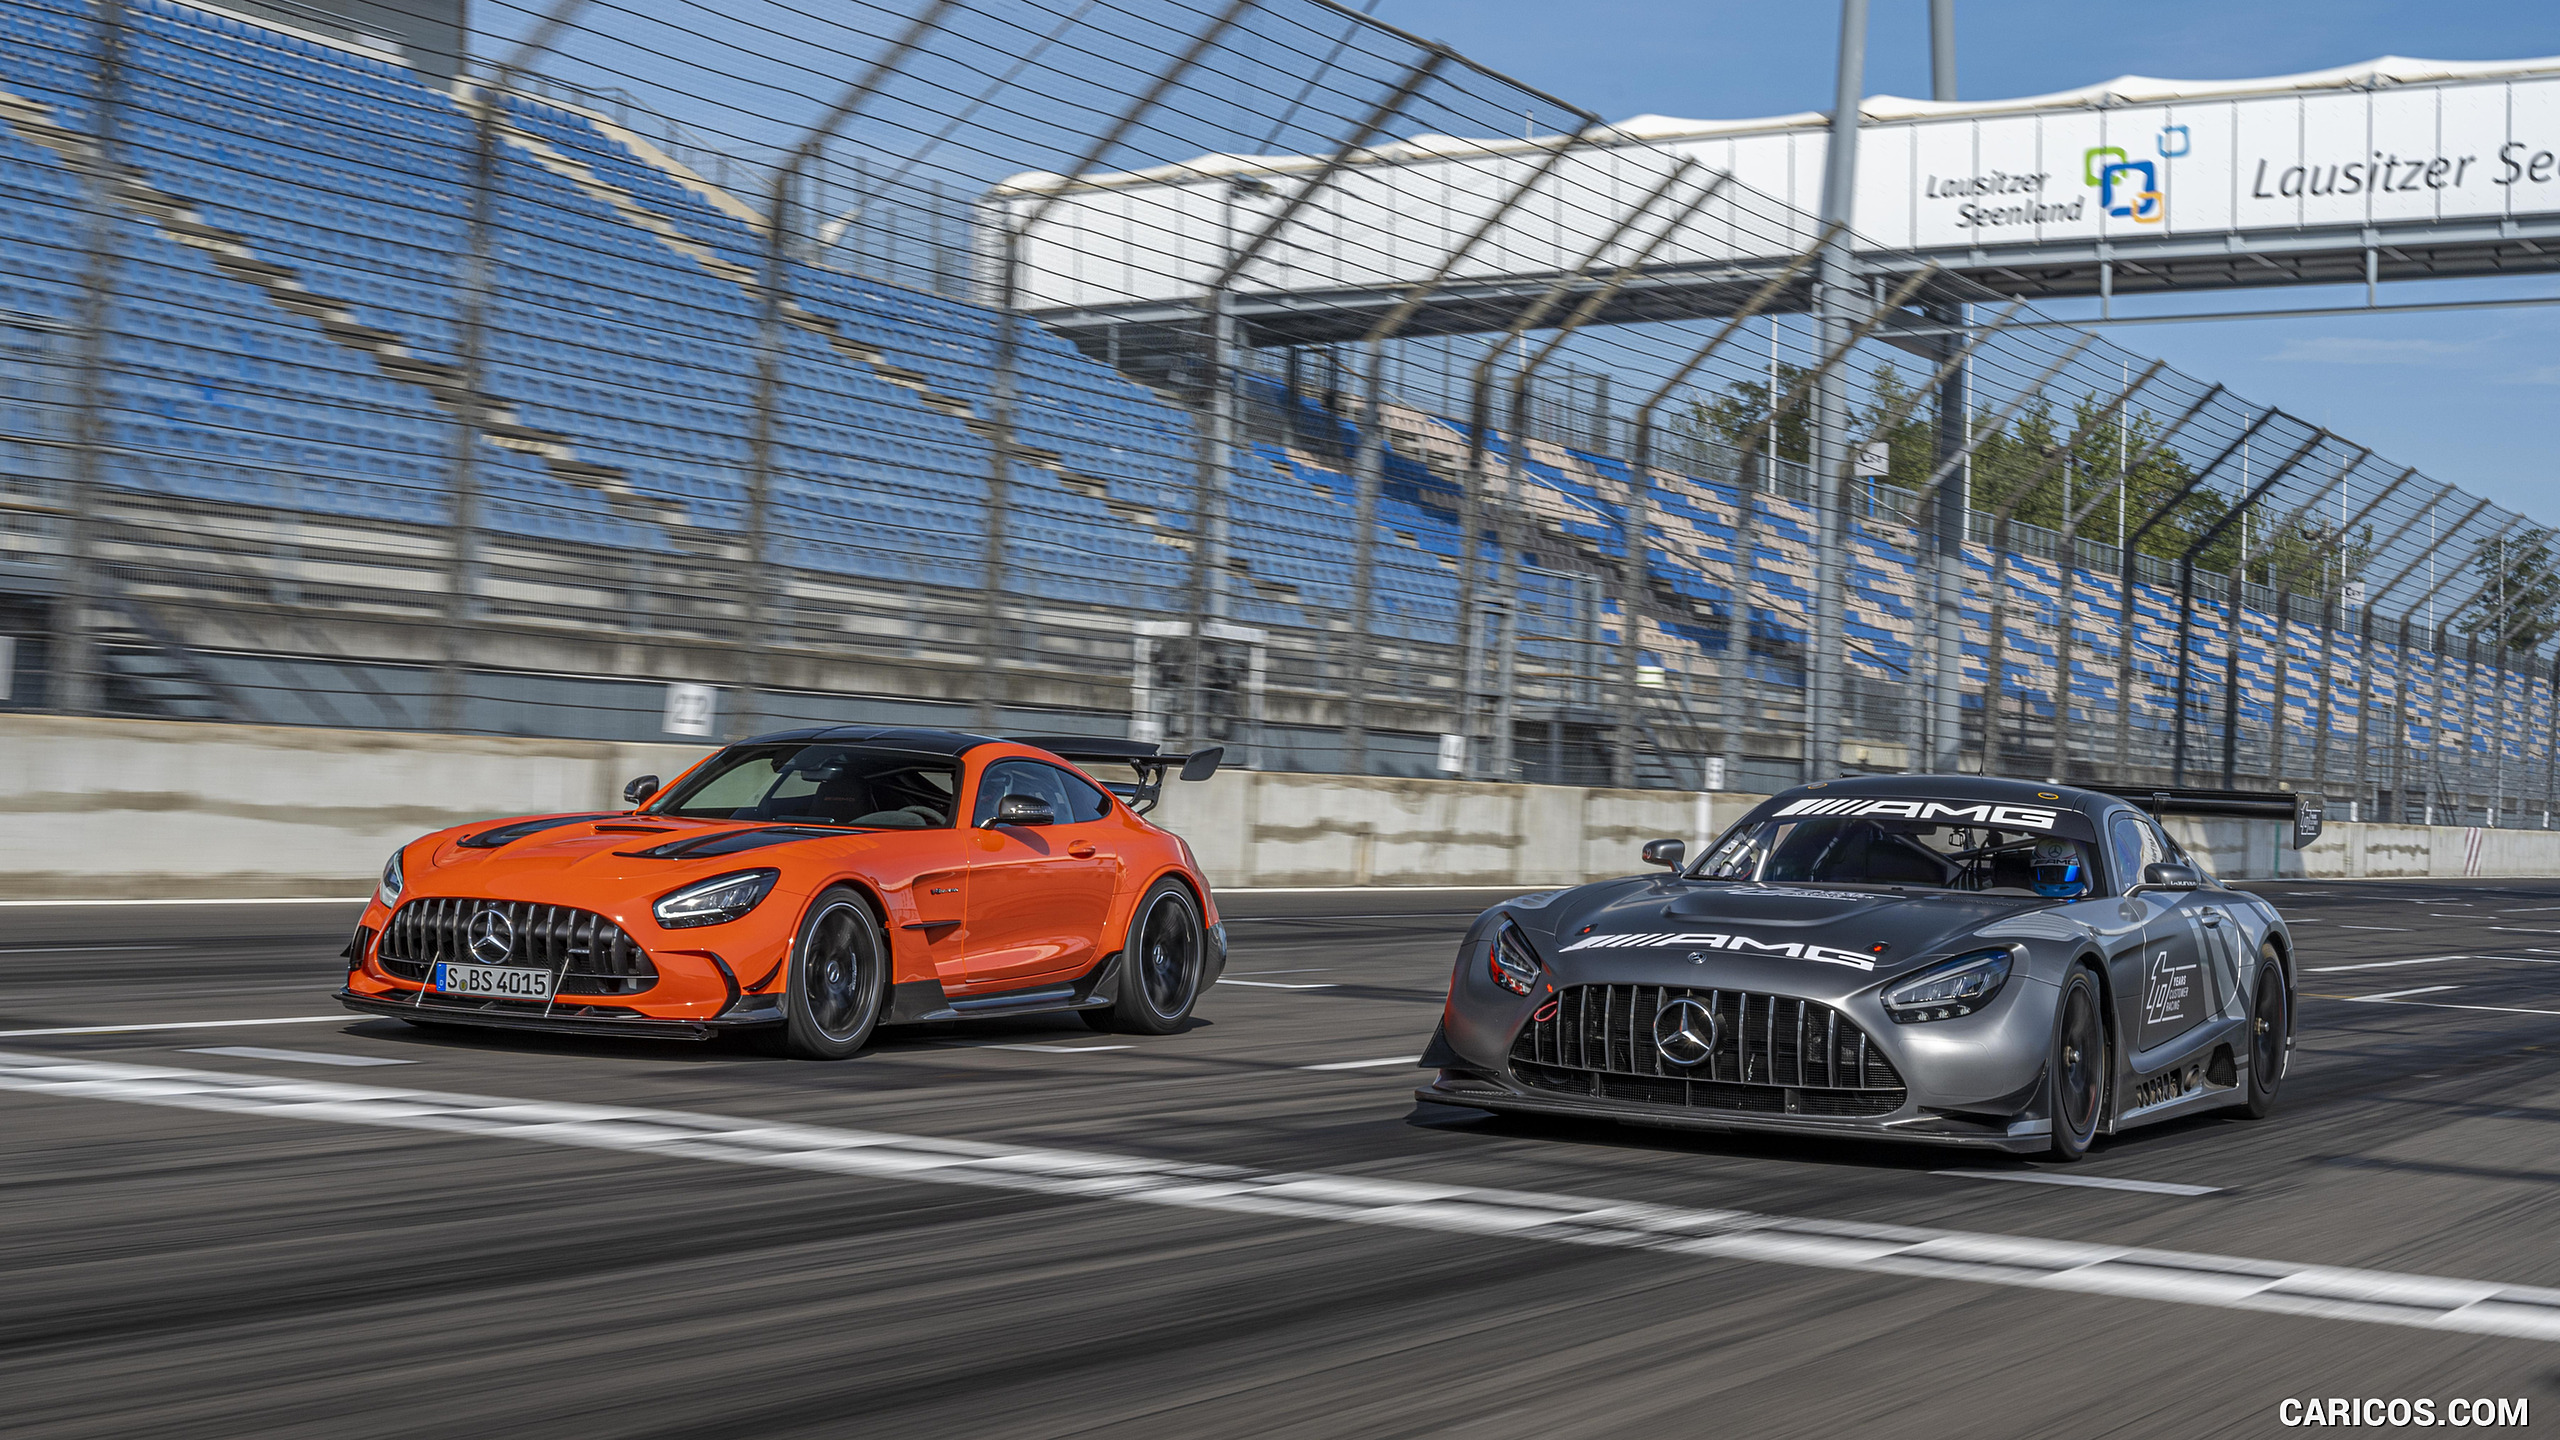 2021 Mercedes-AMG GT Black Series (Color: Magma Beam) and AMG GT3 Racing Car, #147 of 215